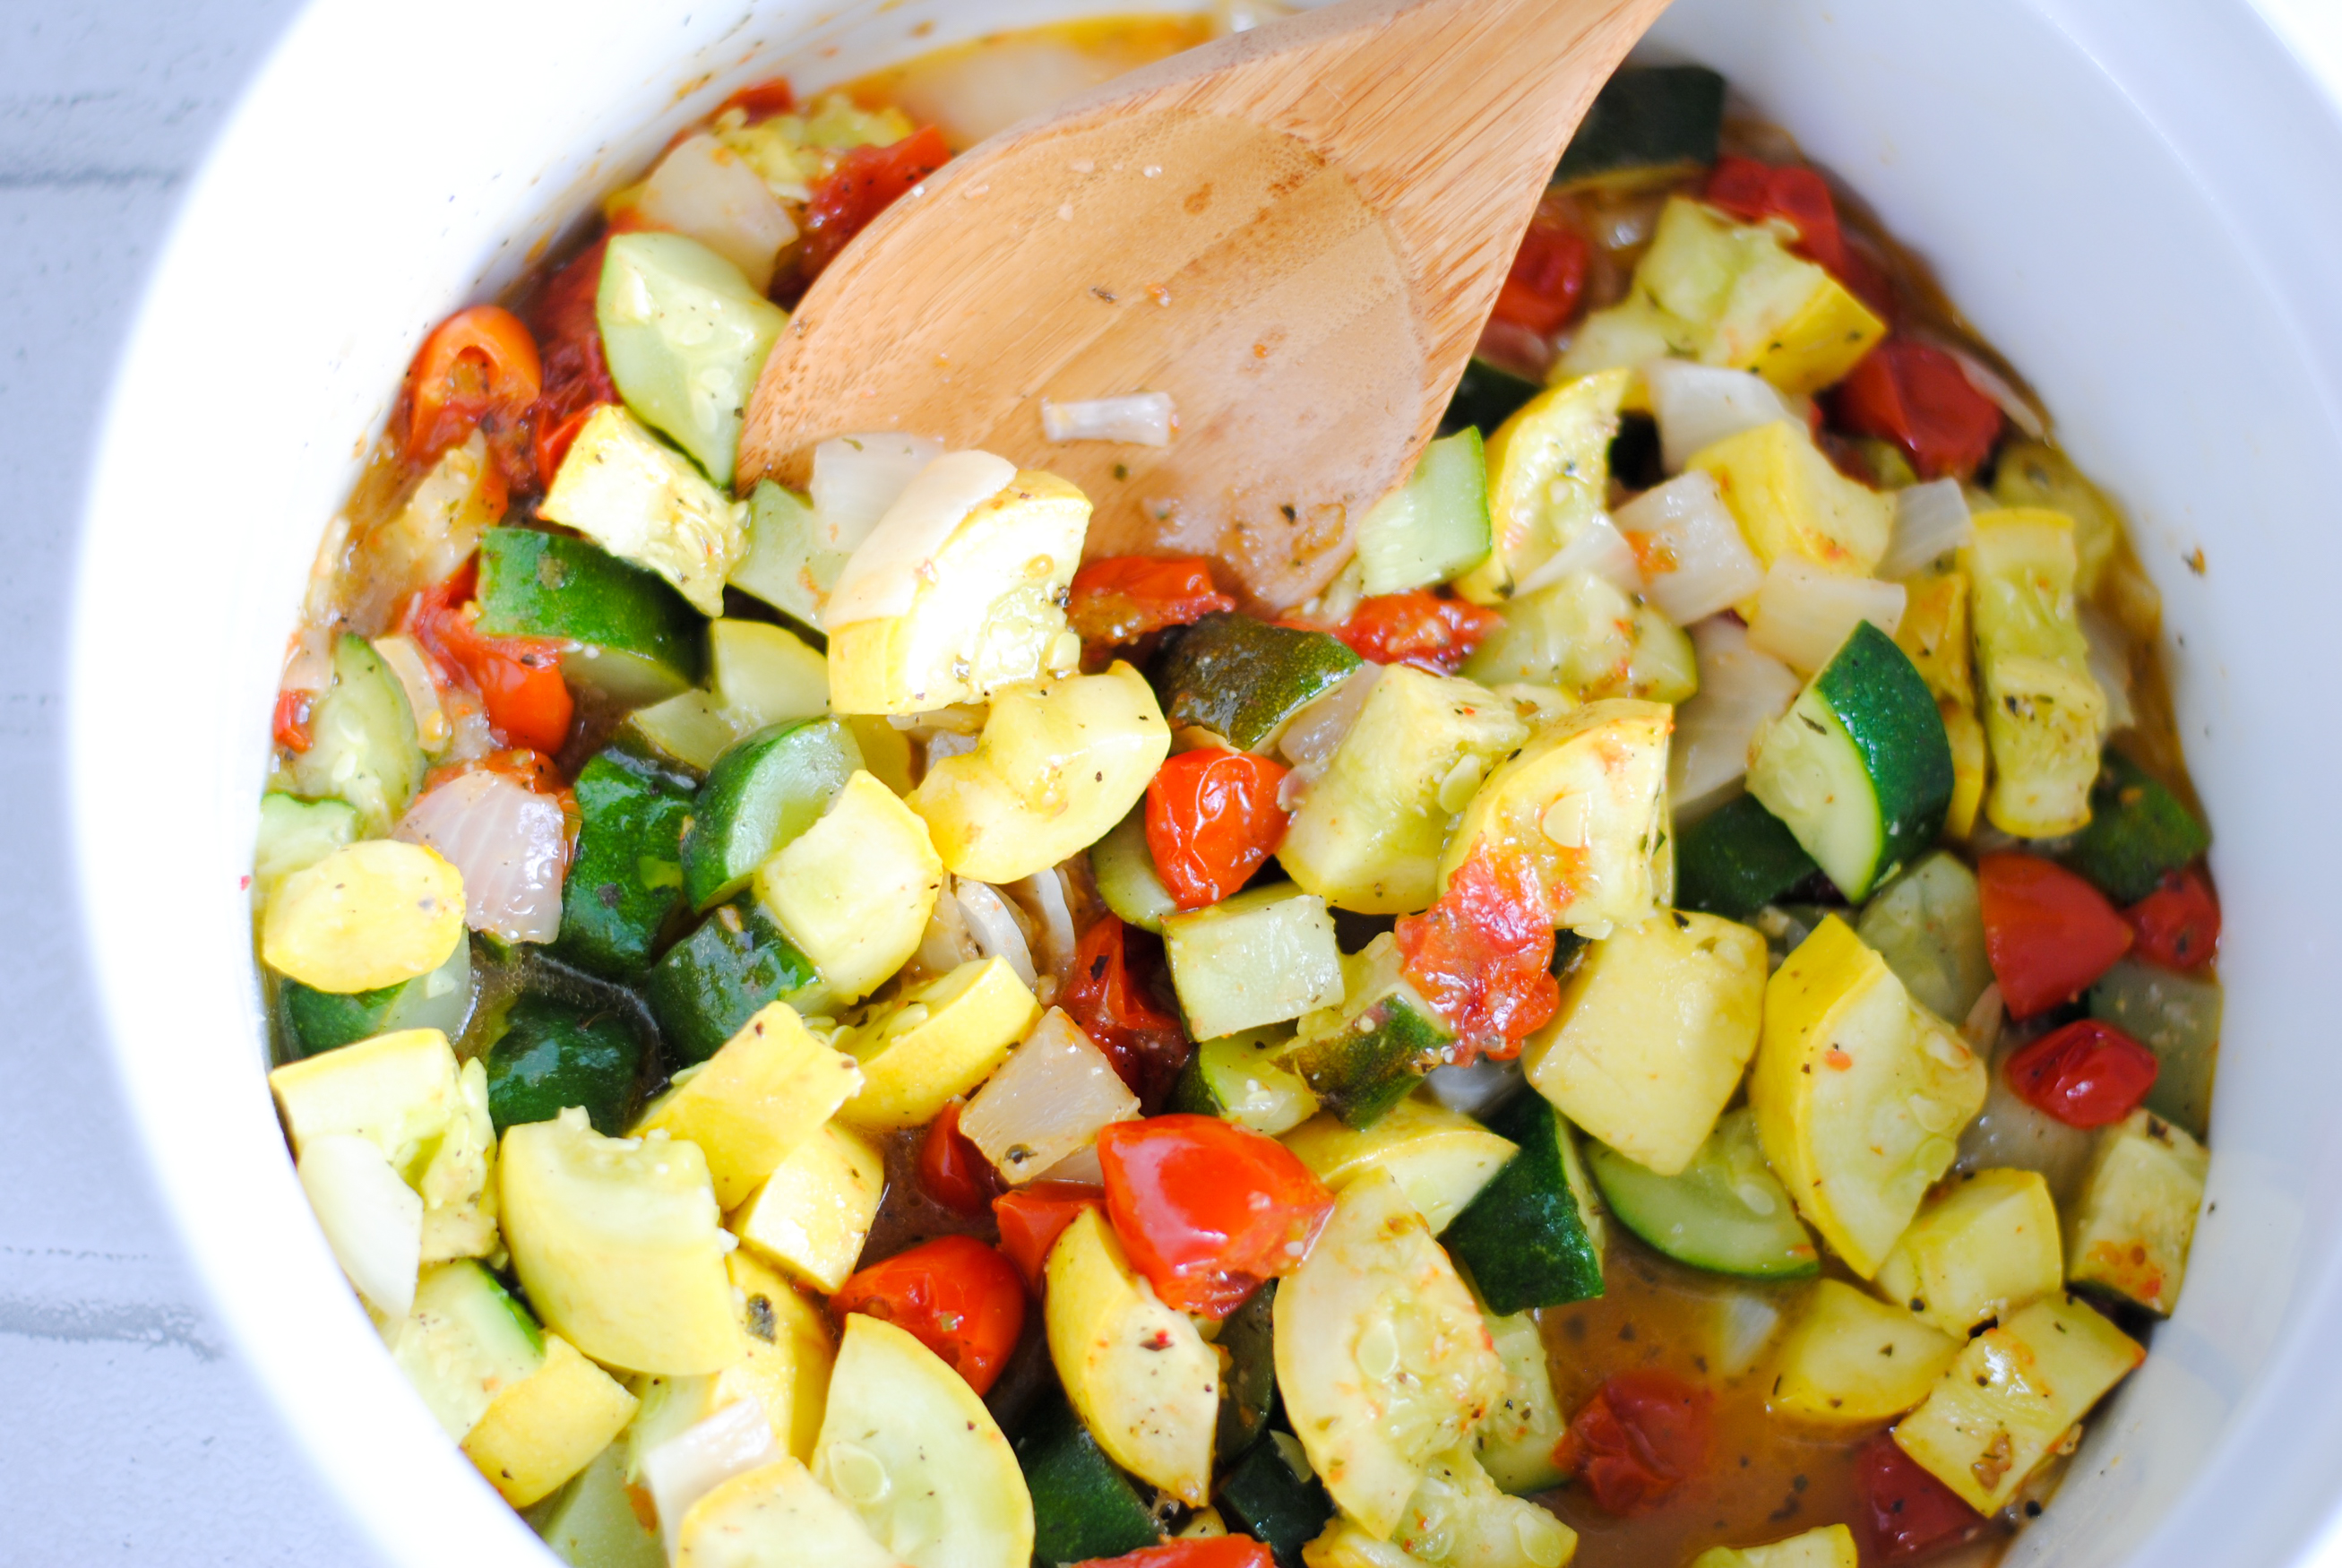 Healthy meals don't have to be stressful or take a lot of time. This classic 20-Minute Weeknight Ratatouille is packed with vegetables and flavor and it's the perfect side dish to your favorite protein. Weeknight family meals just got simpler!